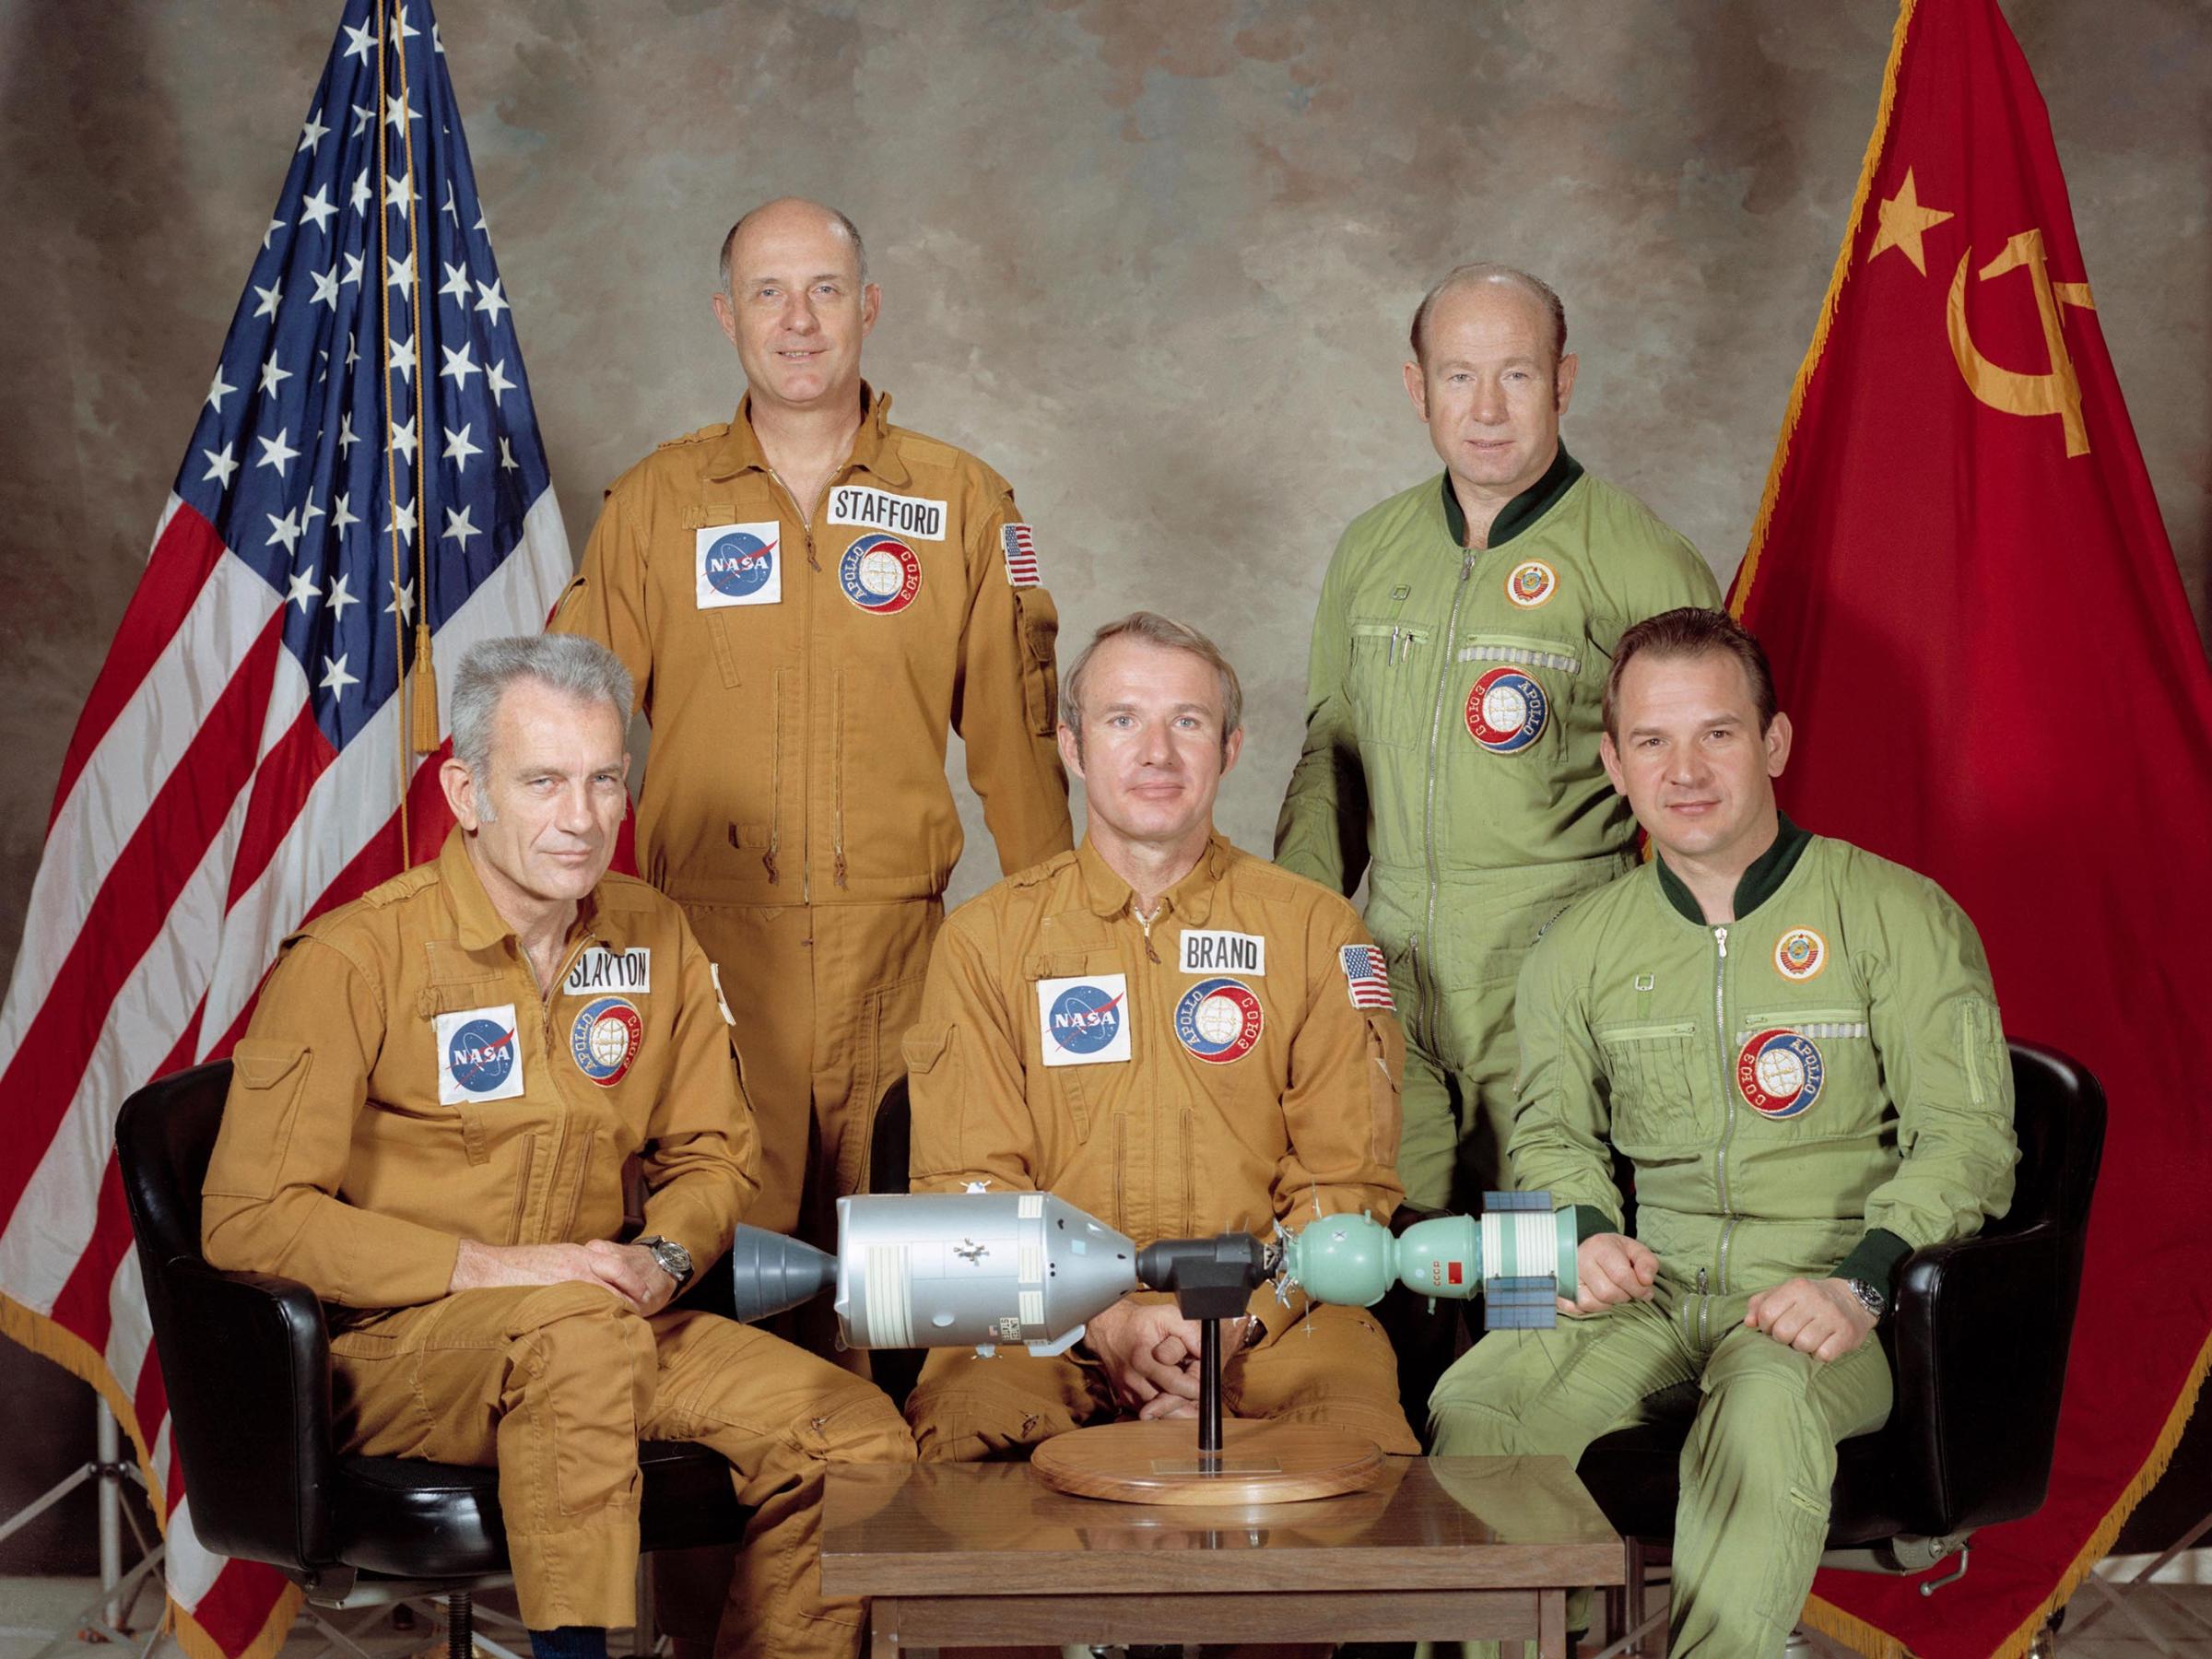 The U.S.-USSR crew for the 1975 Apollo Soyuz Test Project mission: astronaut Tom Stafford (standing on left), commander of the American crew; cosmonaut Alexei Leonov (standing on right), commander of the Soviet crew; astronaut Donald Slayton (seated on left), docking module pilot of the American crew; astronaut Vance Brand (seated in center), command module pilot of the American crew; and cosmonaut Valeriy Kubasov (seated on right), engineer on the Soviet crew.